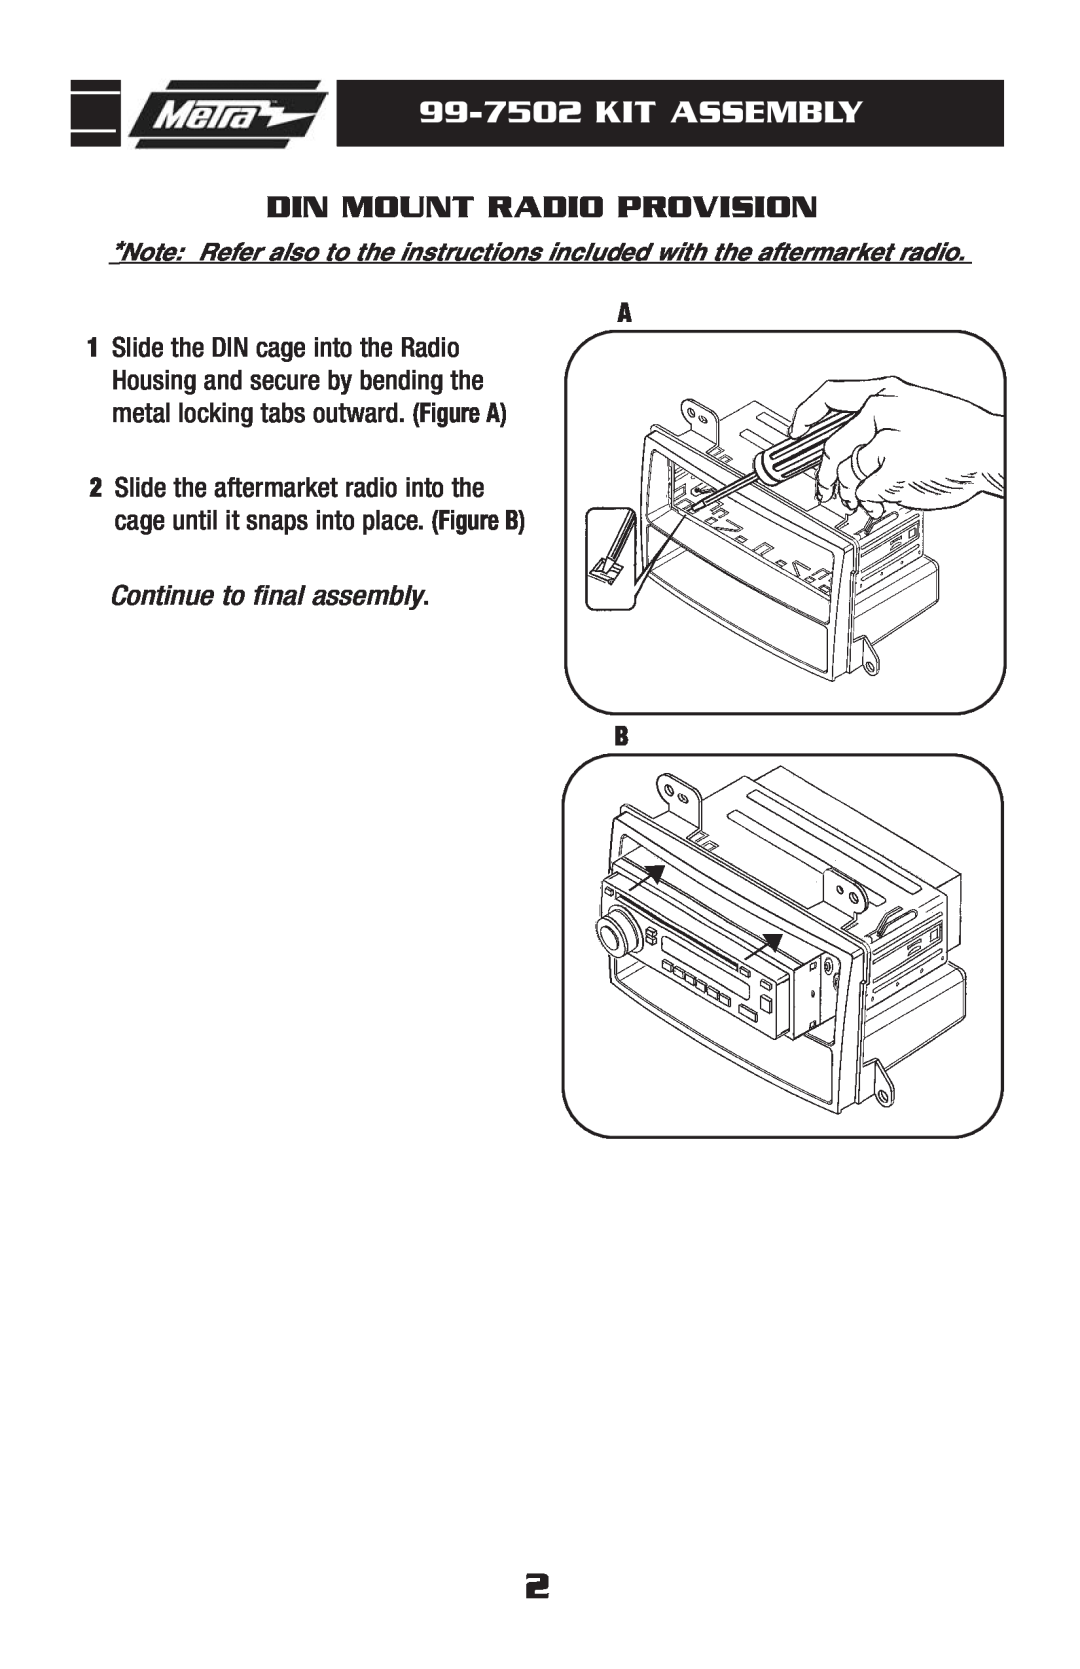 Metra Electronics installation instructions 99-7502KIT ASSEMBLY, Din Mount Radio Provision, Continue to final assembly 